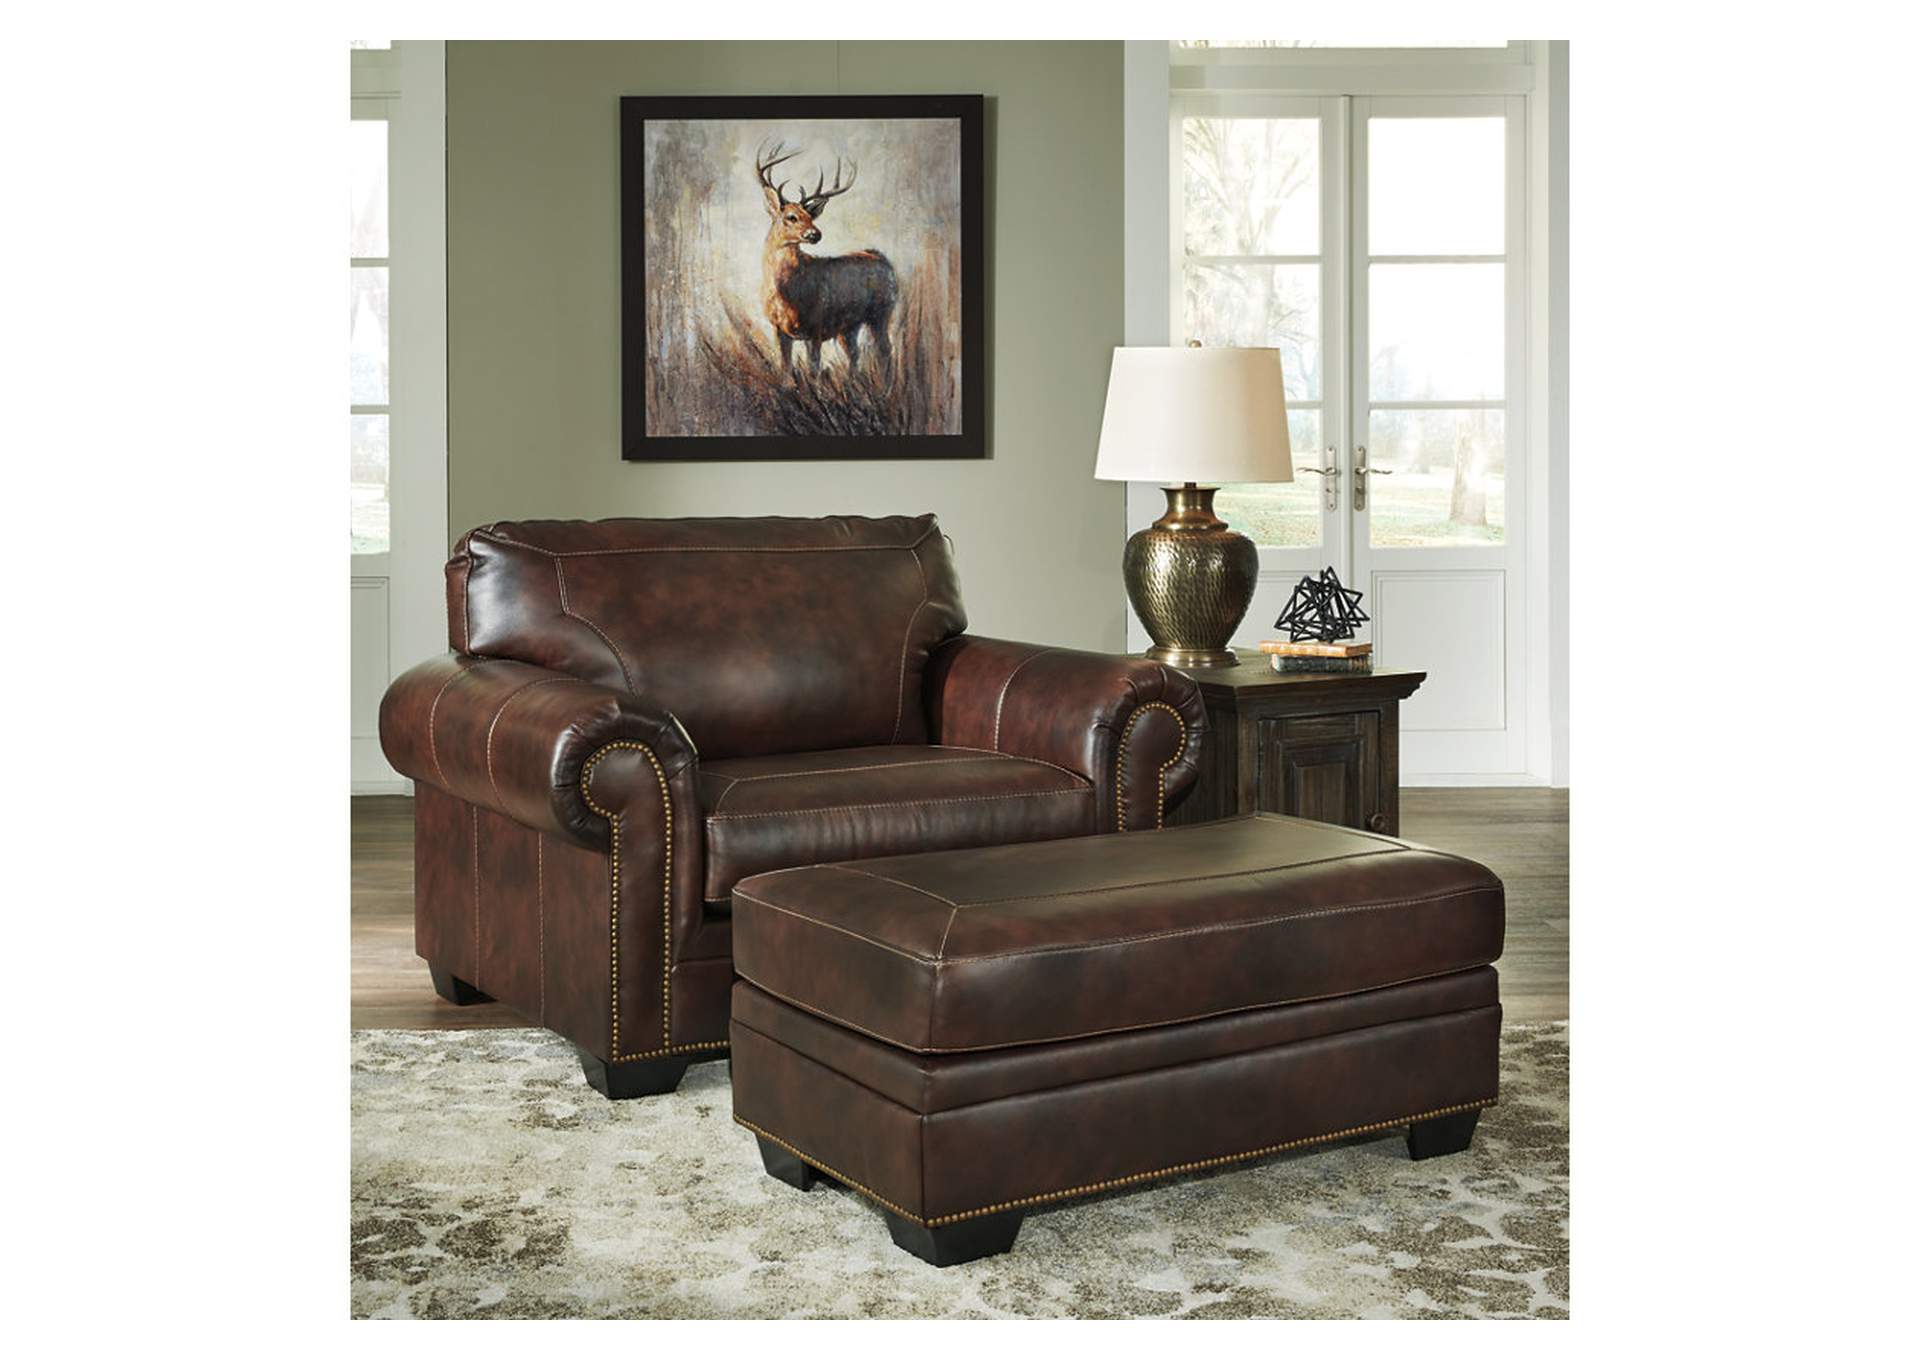 Roleson Oversized Chair Ashley, Oversized Brown Leather Chair